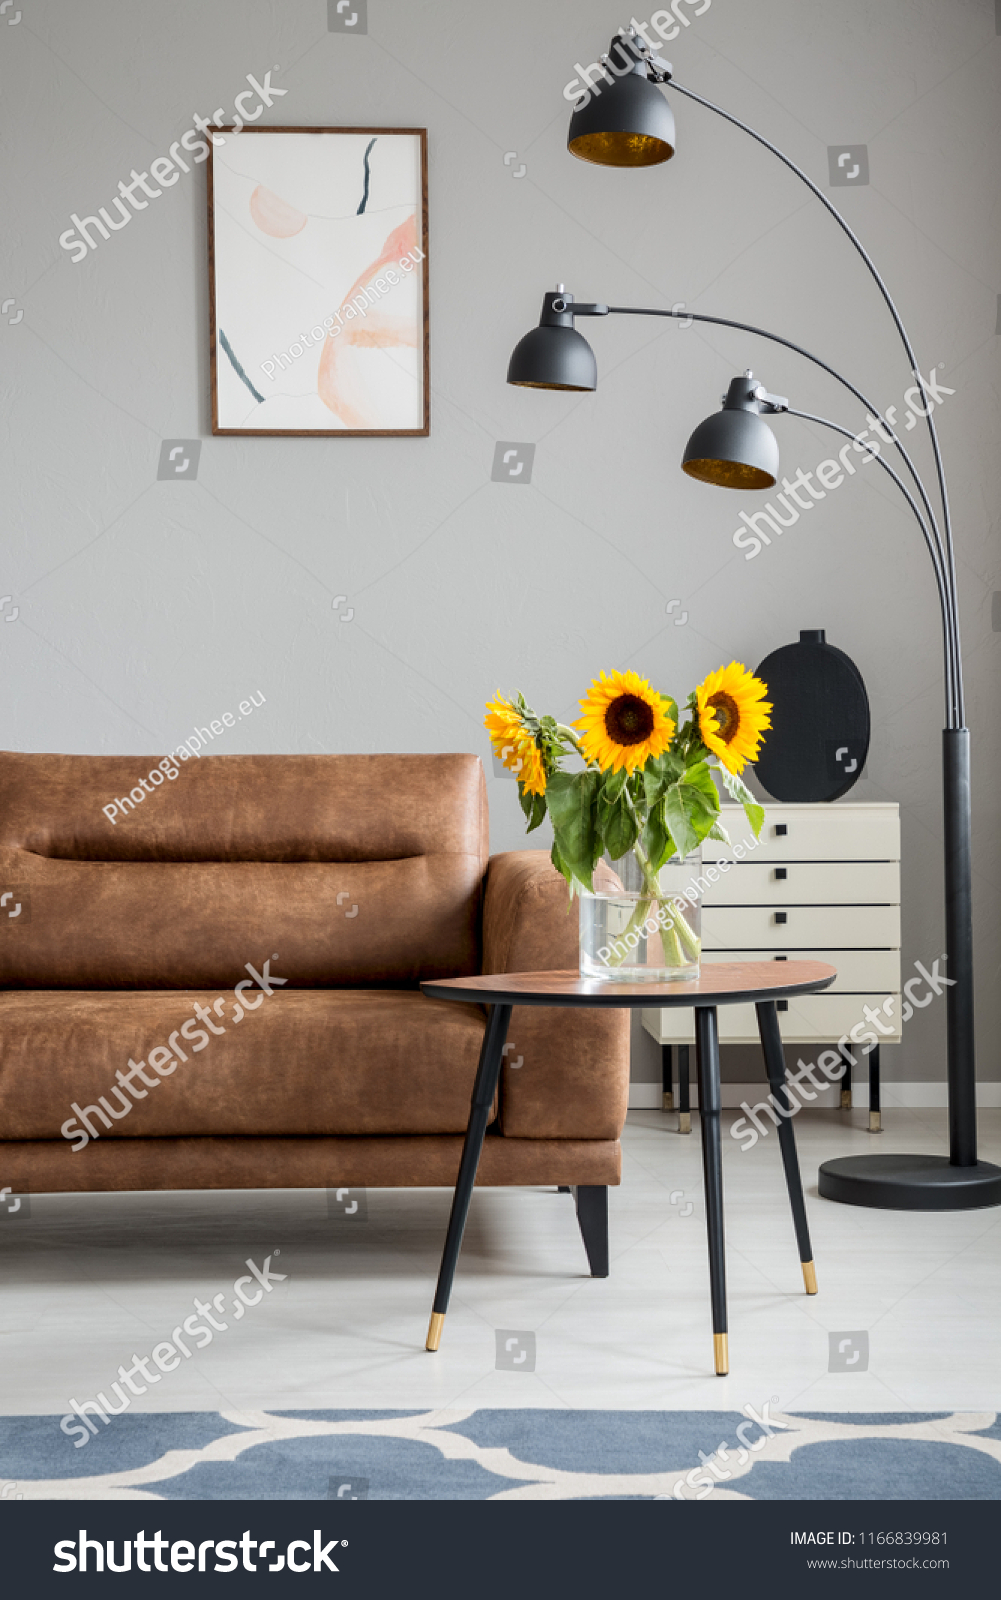 Sunflowers on wooden table next to brown sofa and black lamp in flat interior with poster. Real photo #1166839981